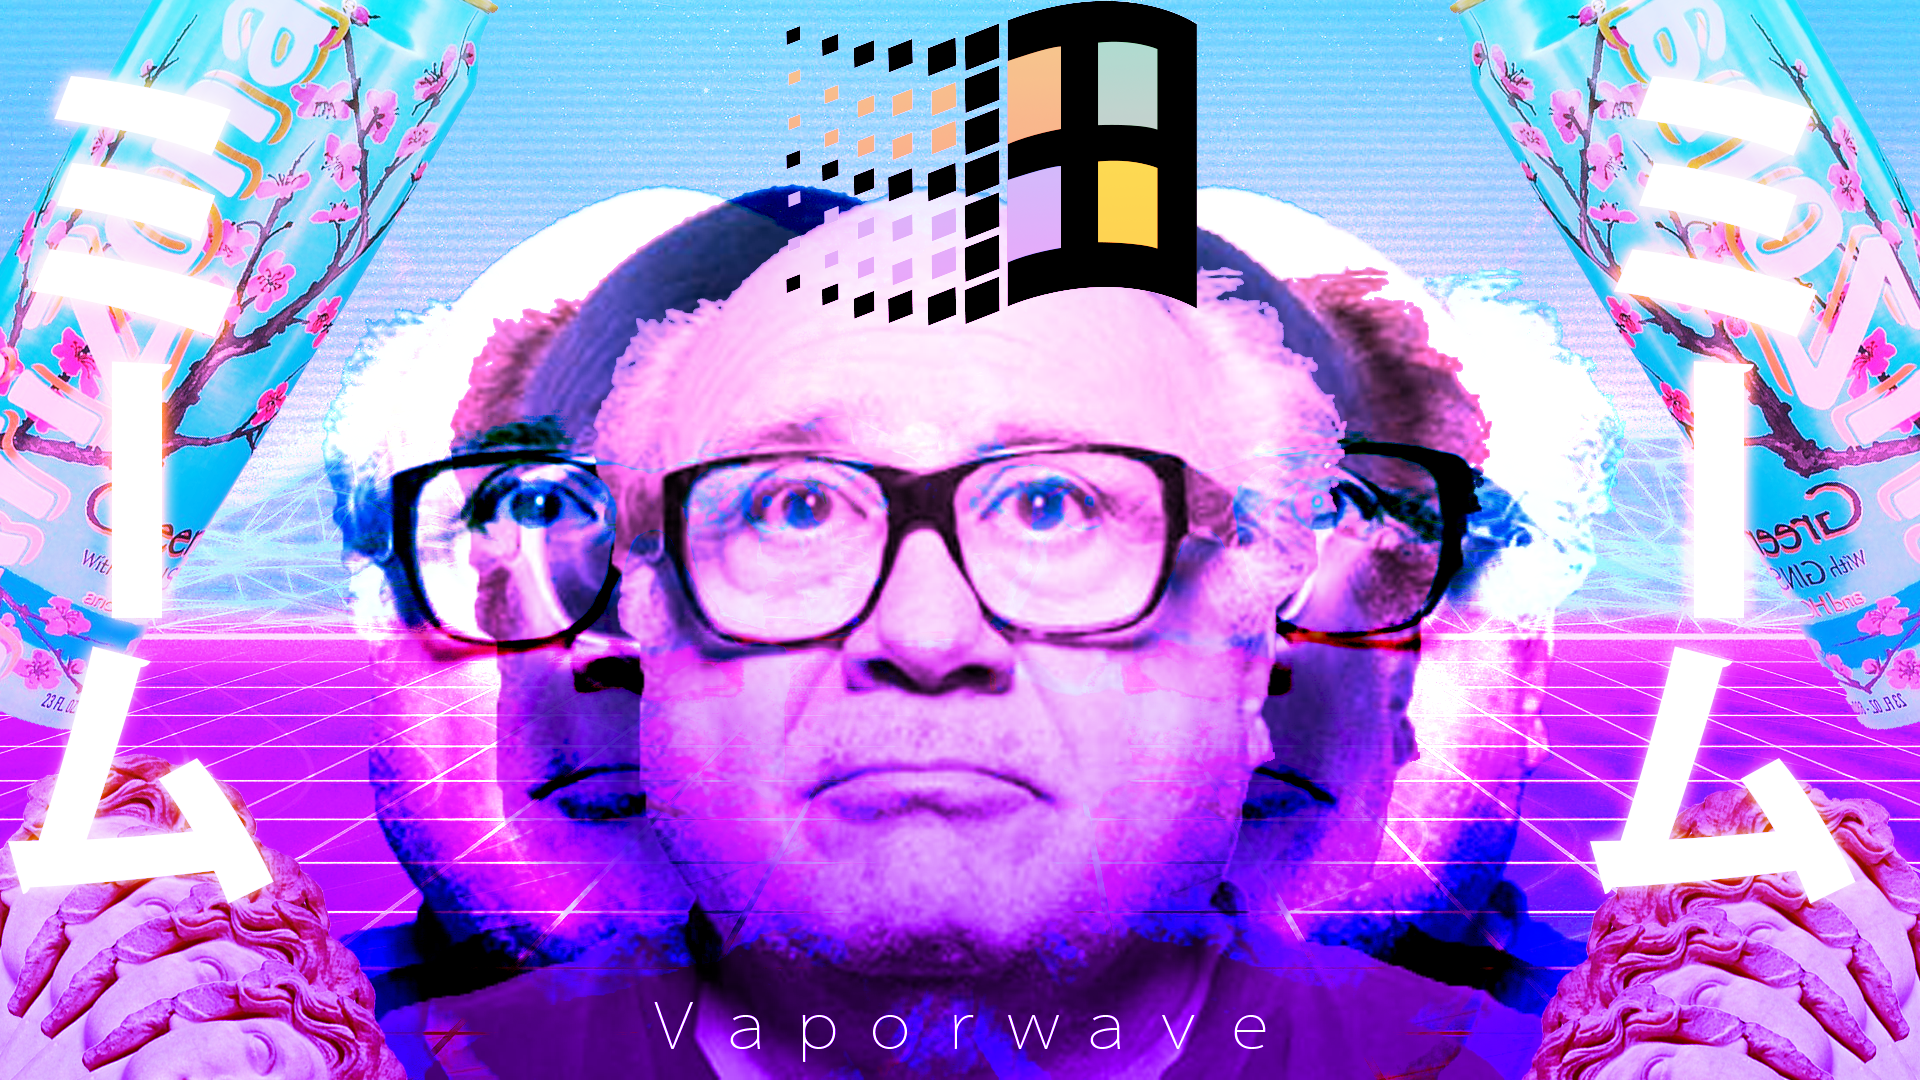 Aesthetic Danny Devito  Danny devito Weird images Edgy wallpaper